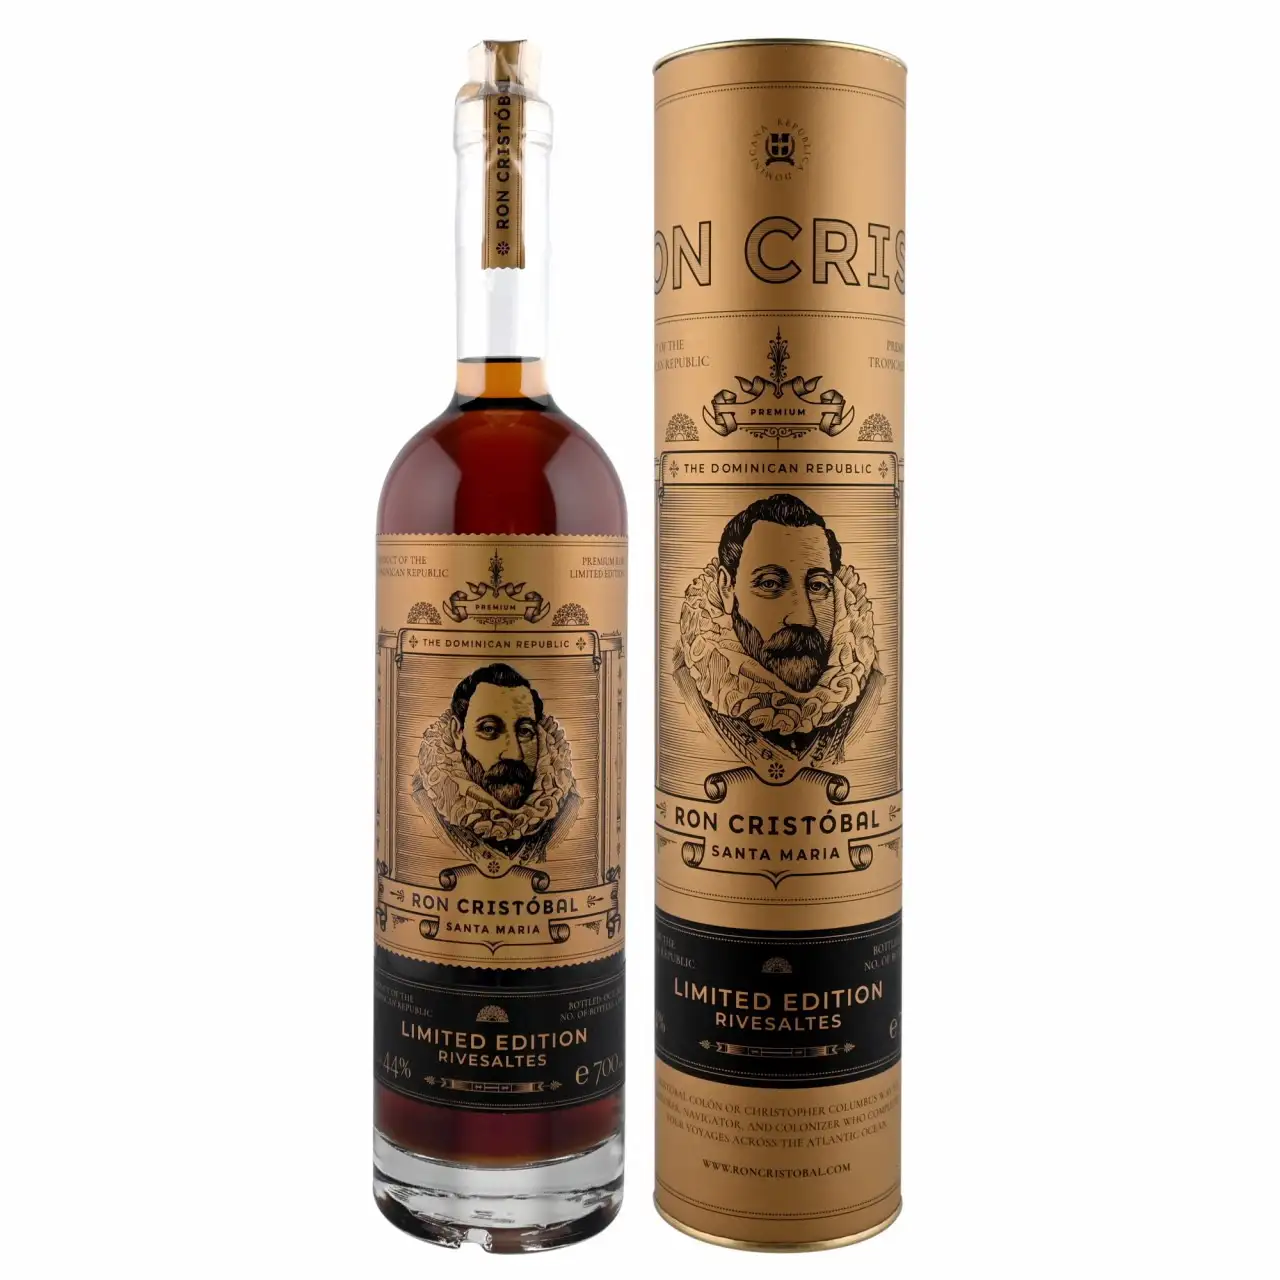 Image of the front of the bottle of the rum Ron Cristóbal Santa Maria Rivesaltes Cask Finish